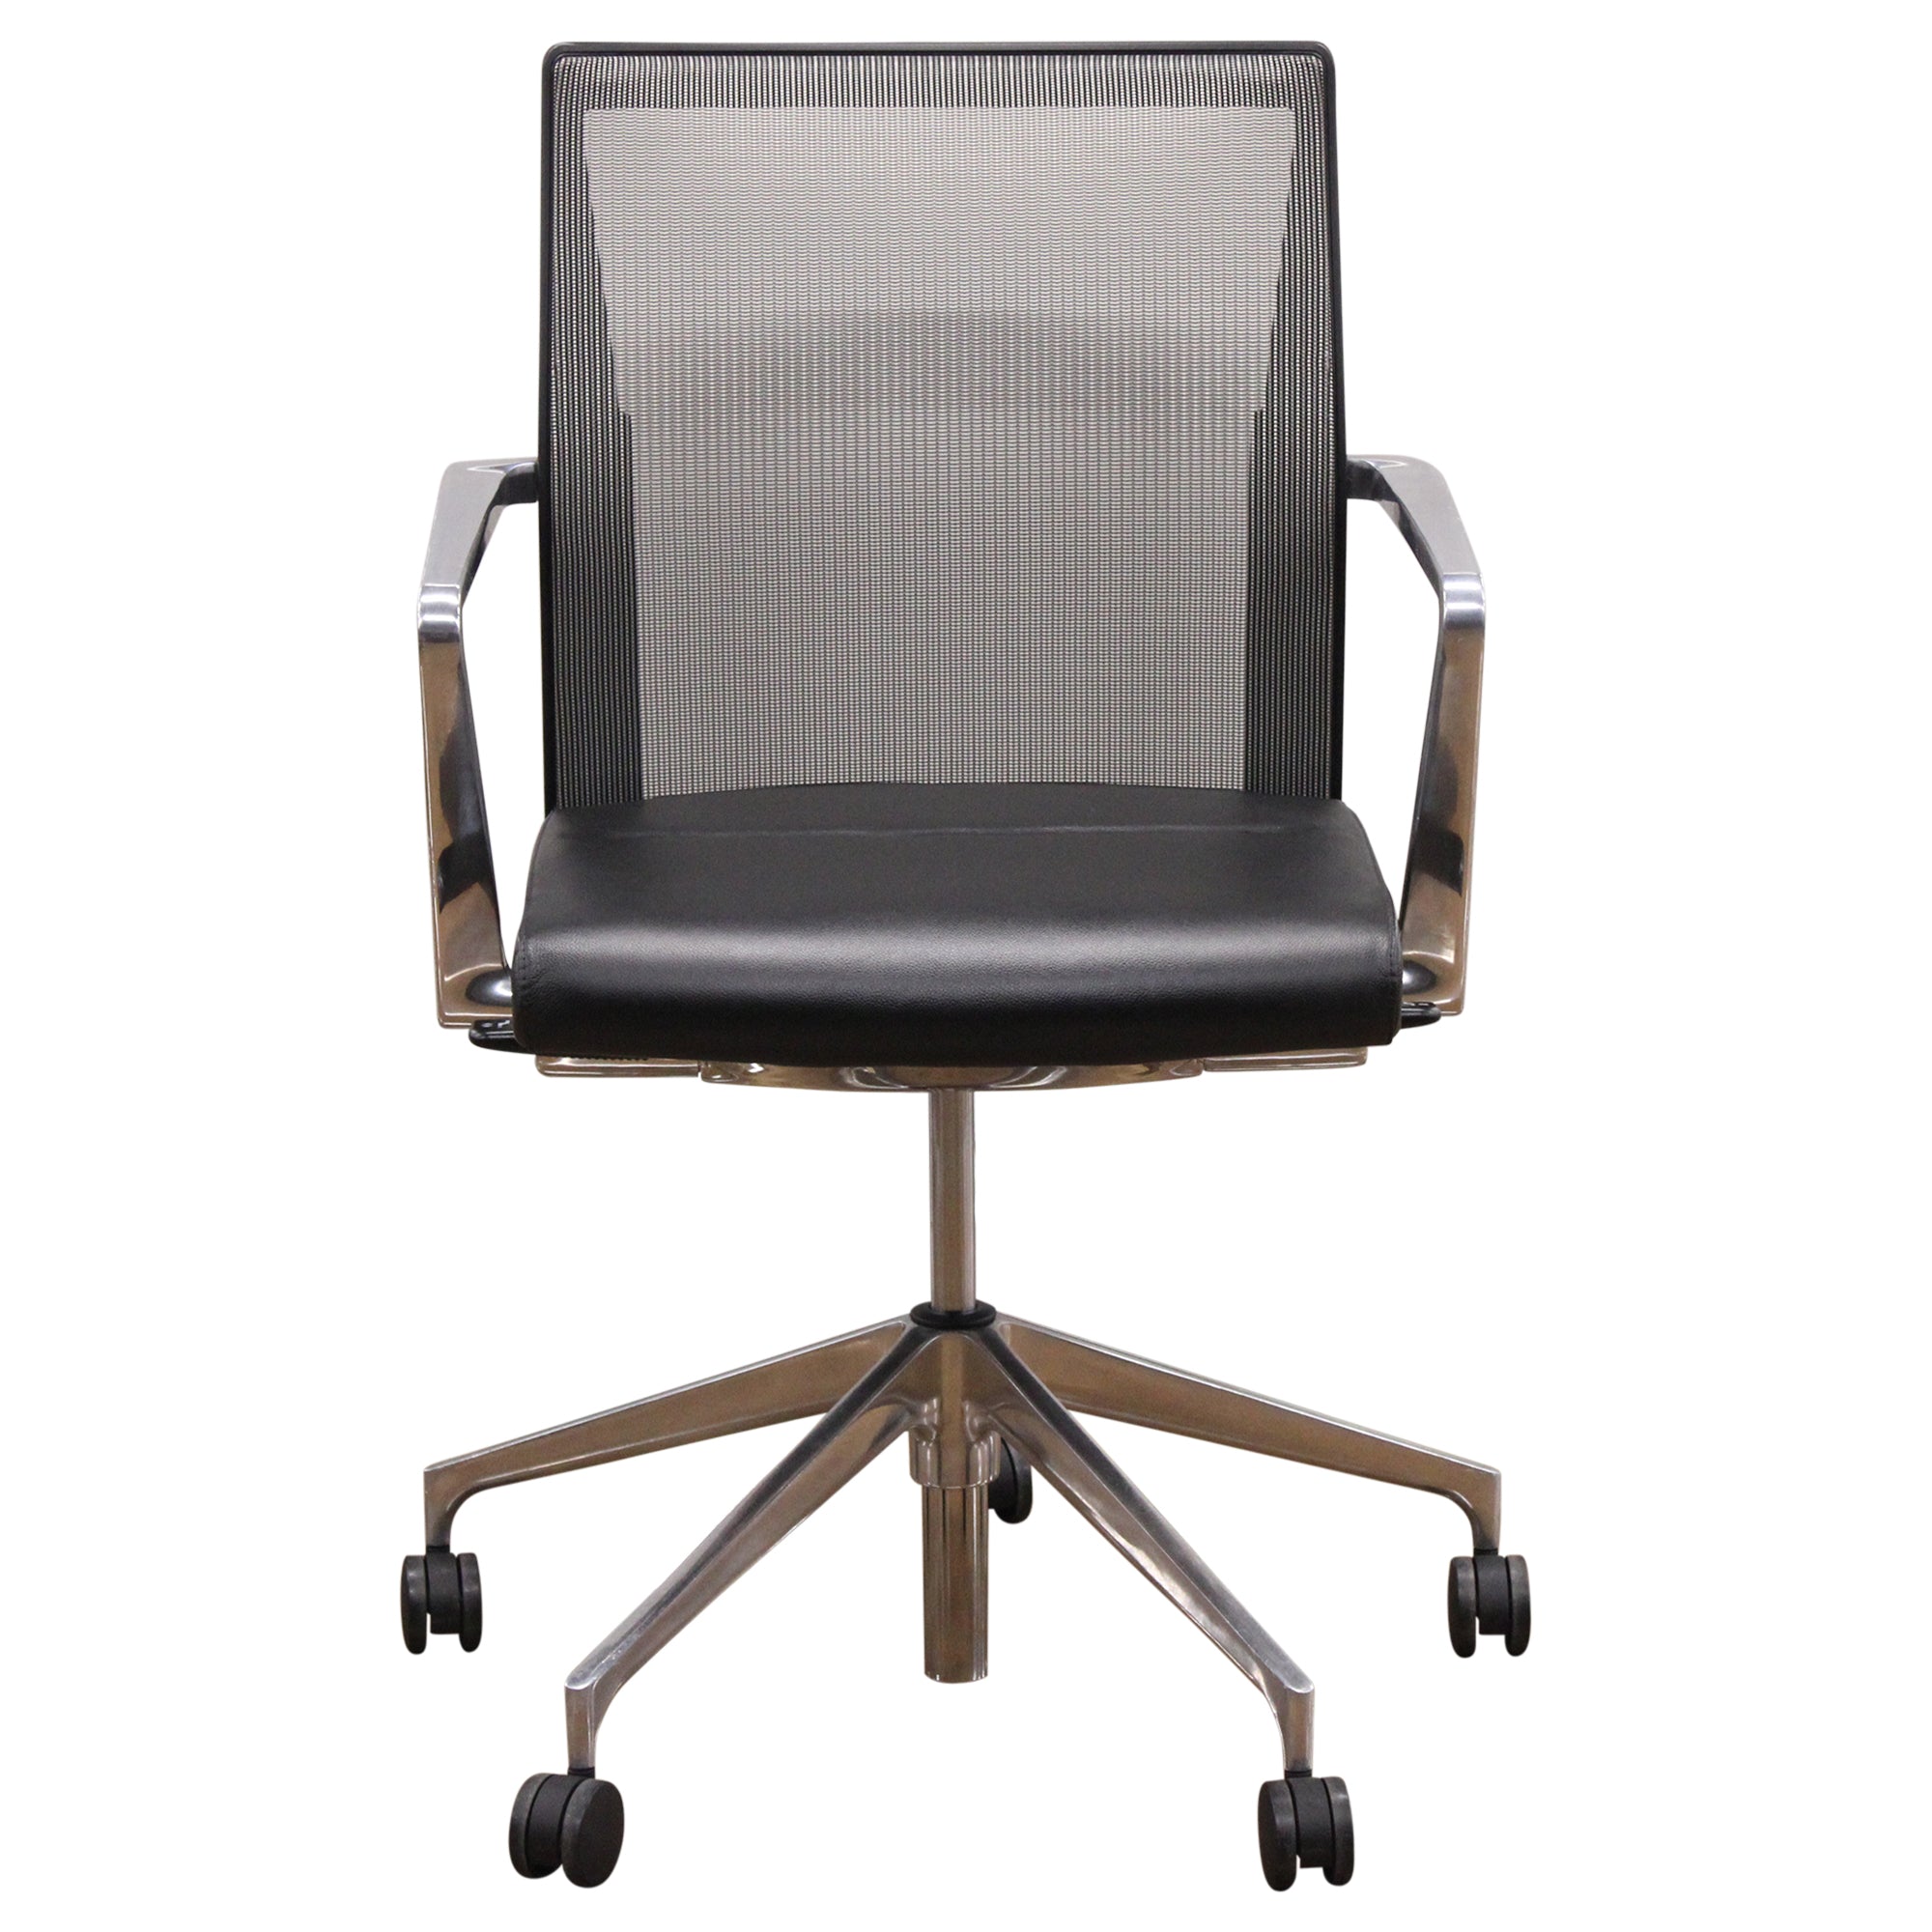 Stylex Sava Conference Chair, Black - Preowned